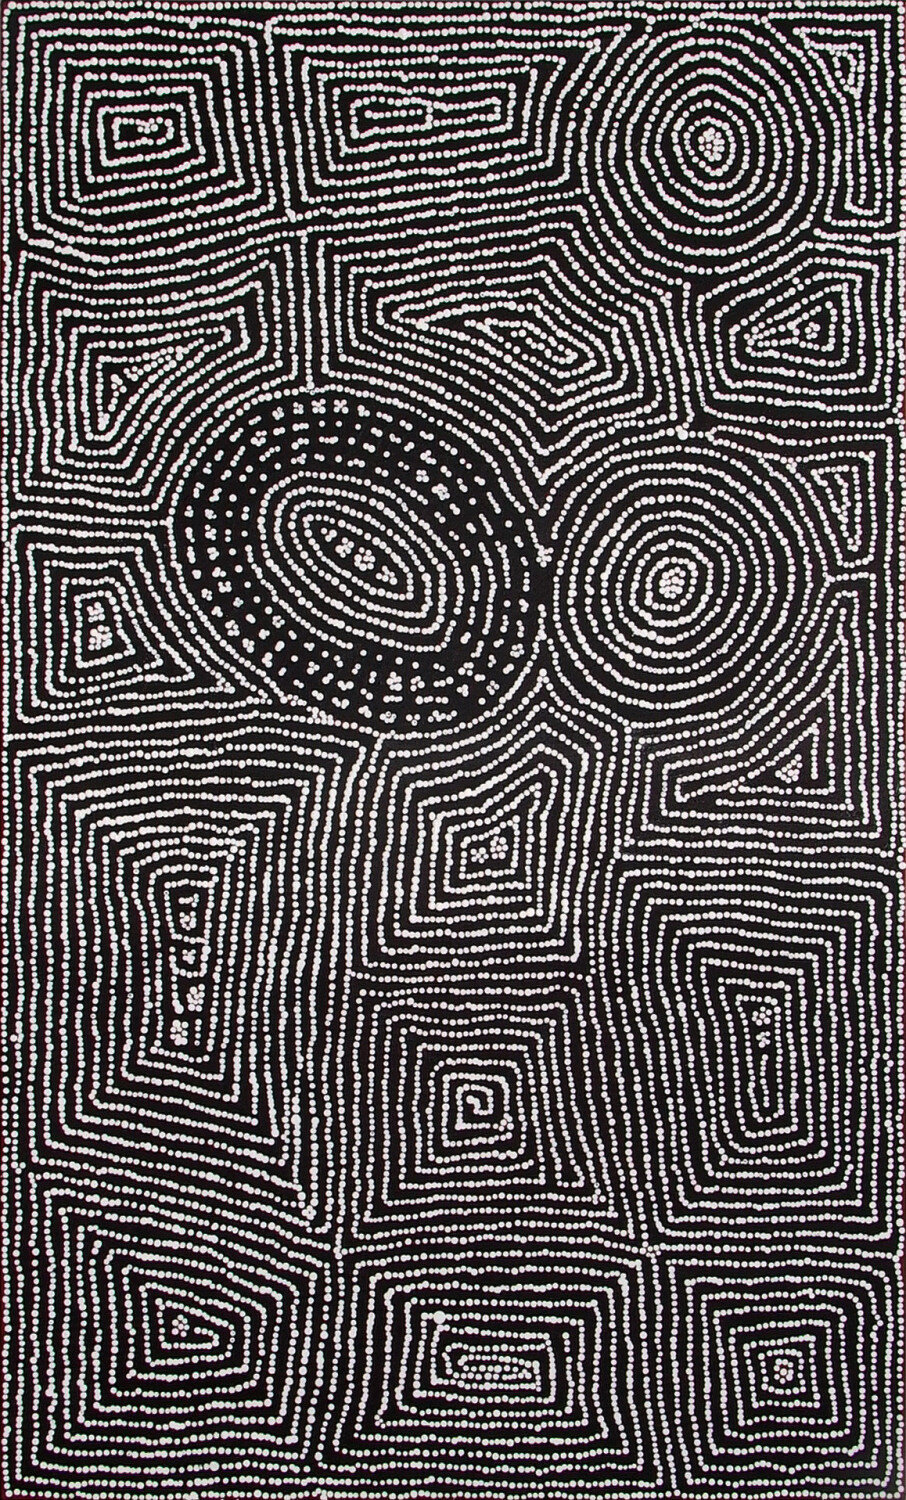 Tingari Cycle (2006) by Barney Campbell Tjakamarra 152x91cm CAT 9462BC